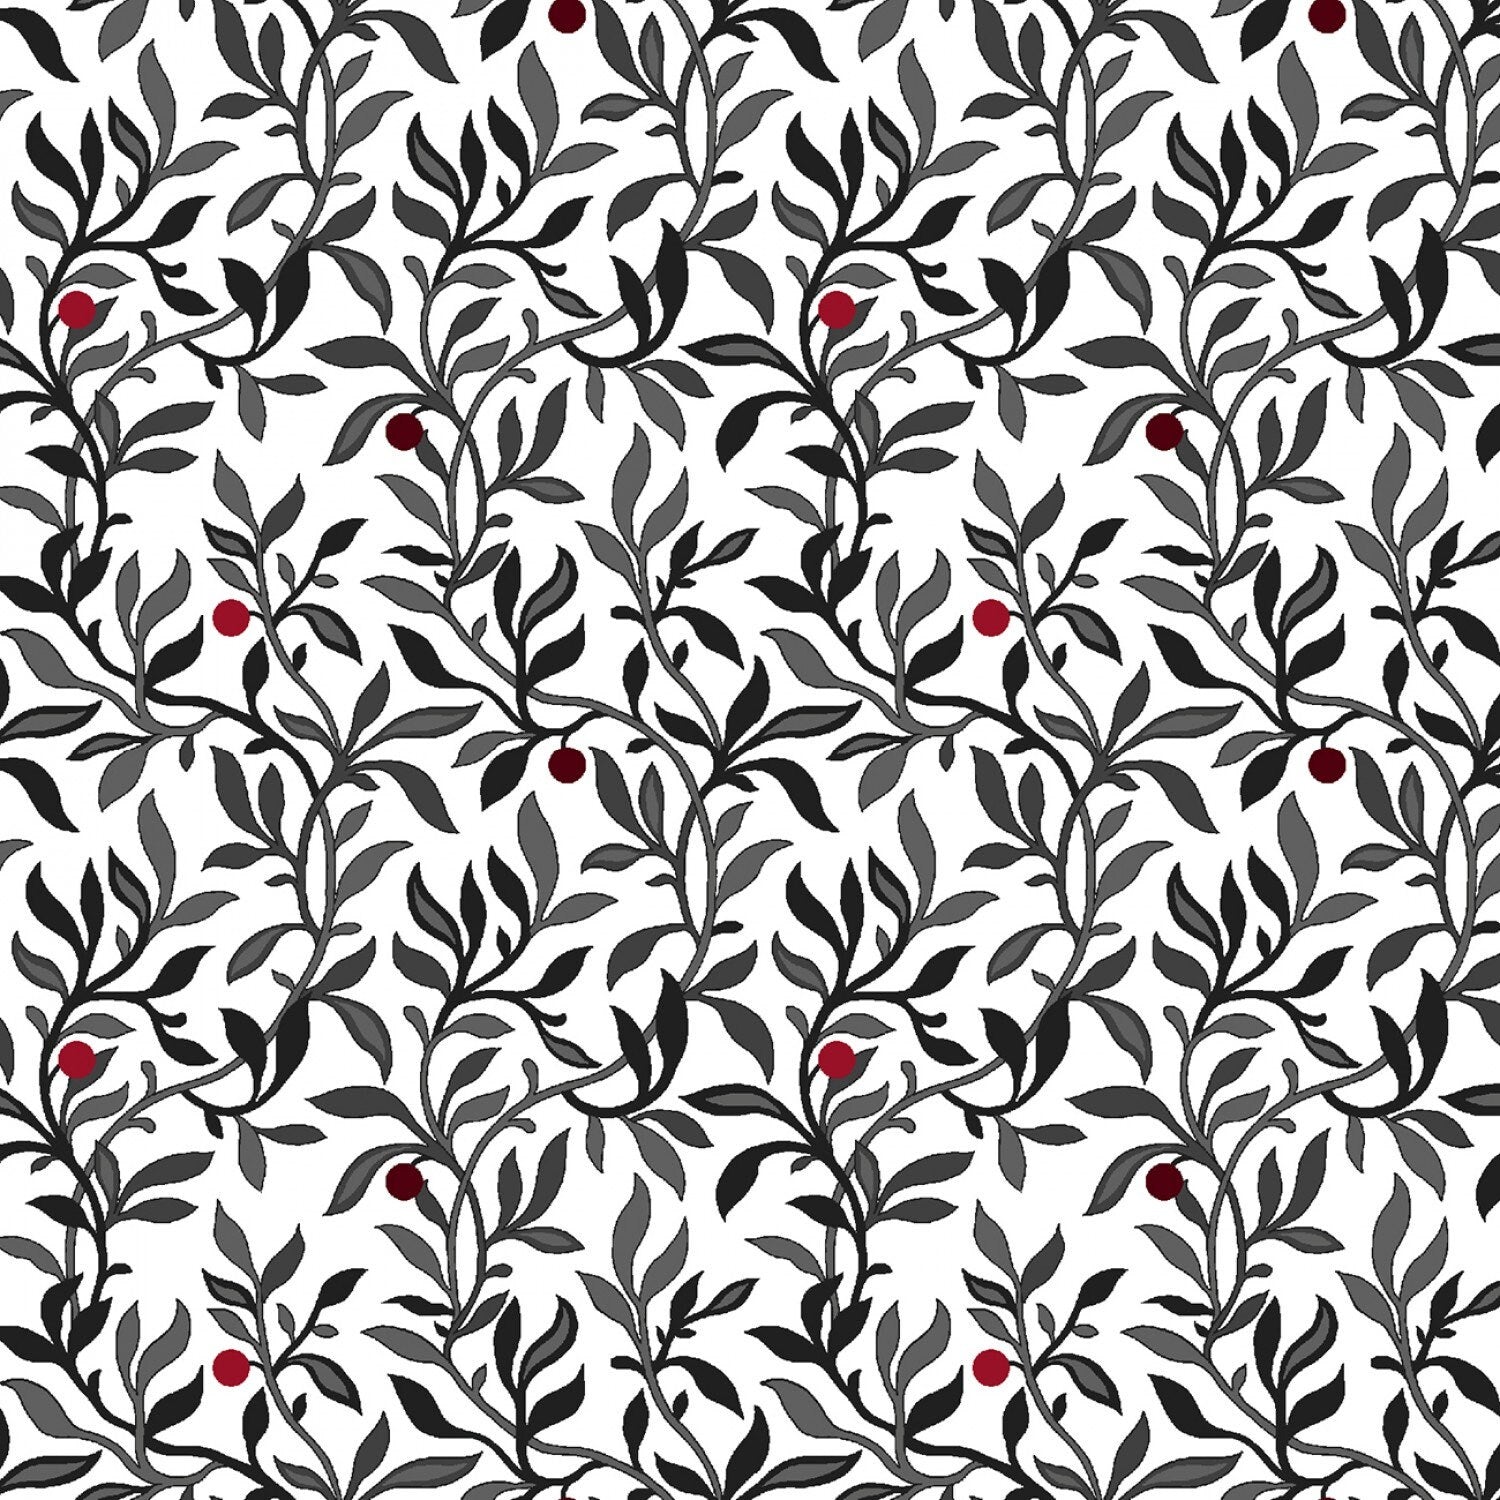 Black White and Red Hot Berry Vine Fabric, Henry Glass 2447-01, Quilter's Cotton, Apparel Fabric, By the Yard